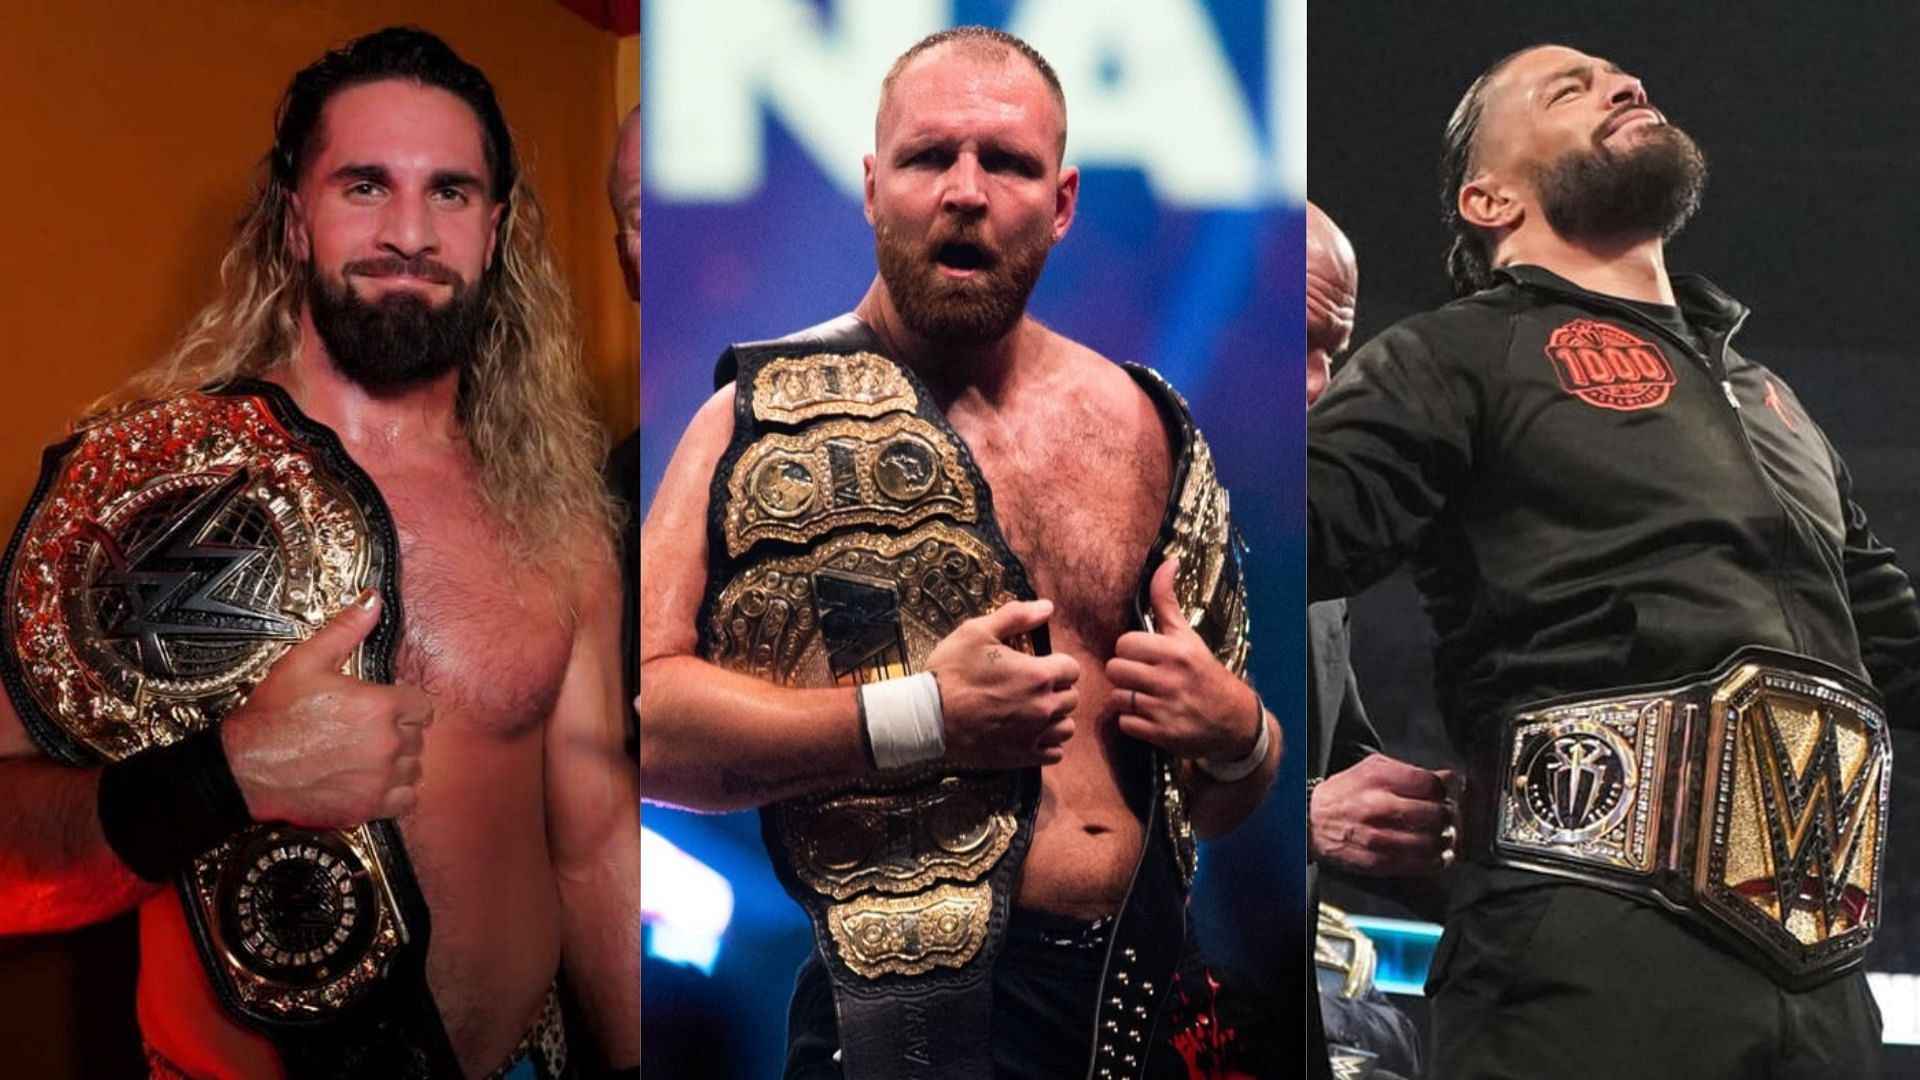 Does Jon Moxley deserve his spot on this list?